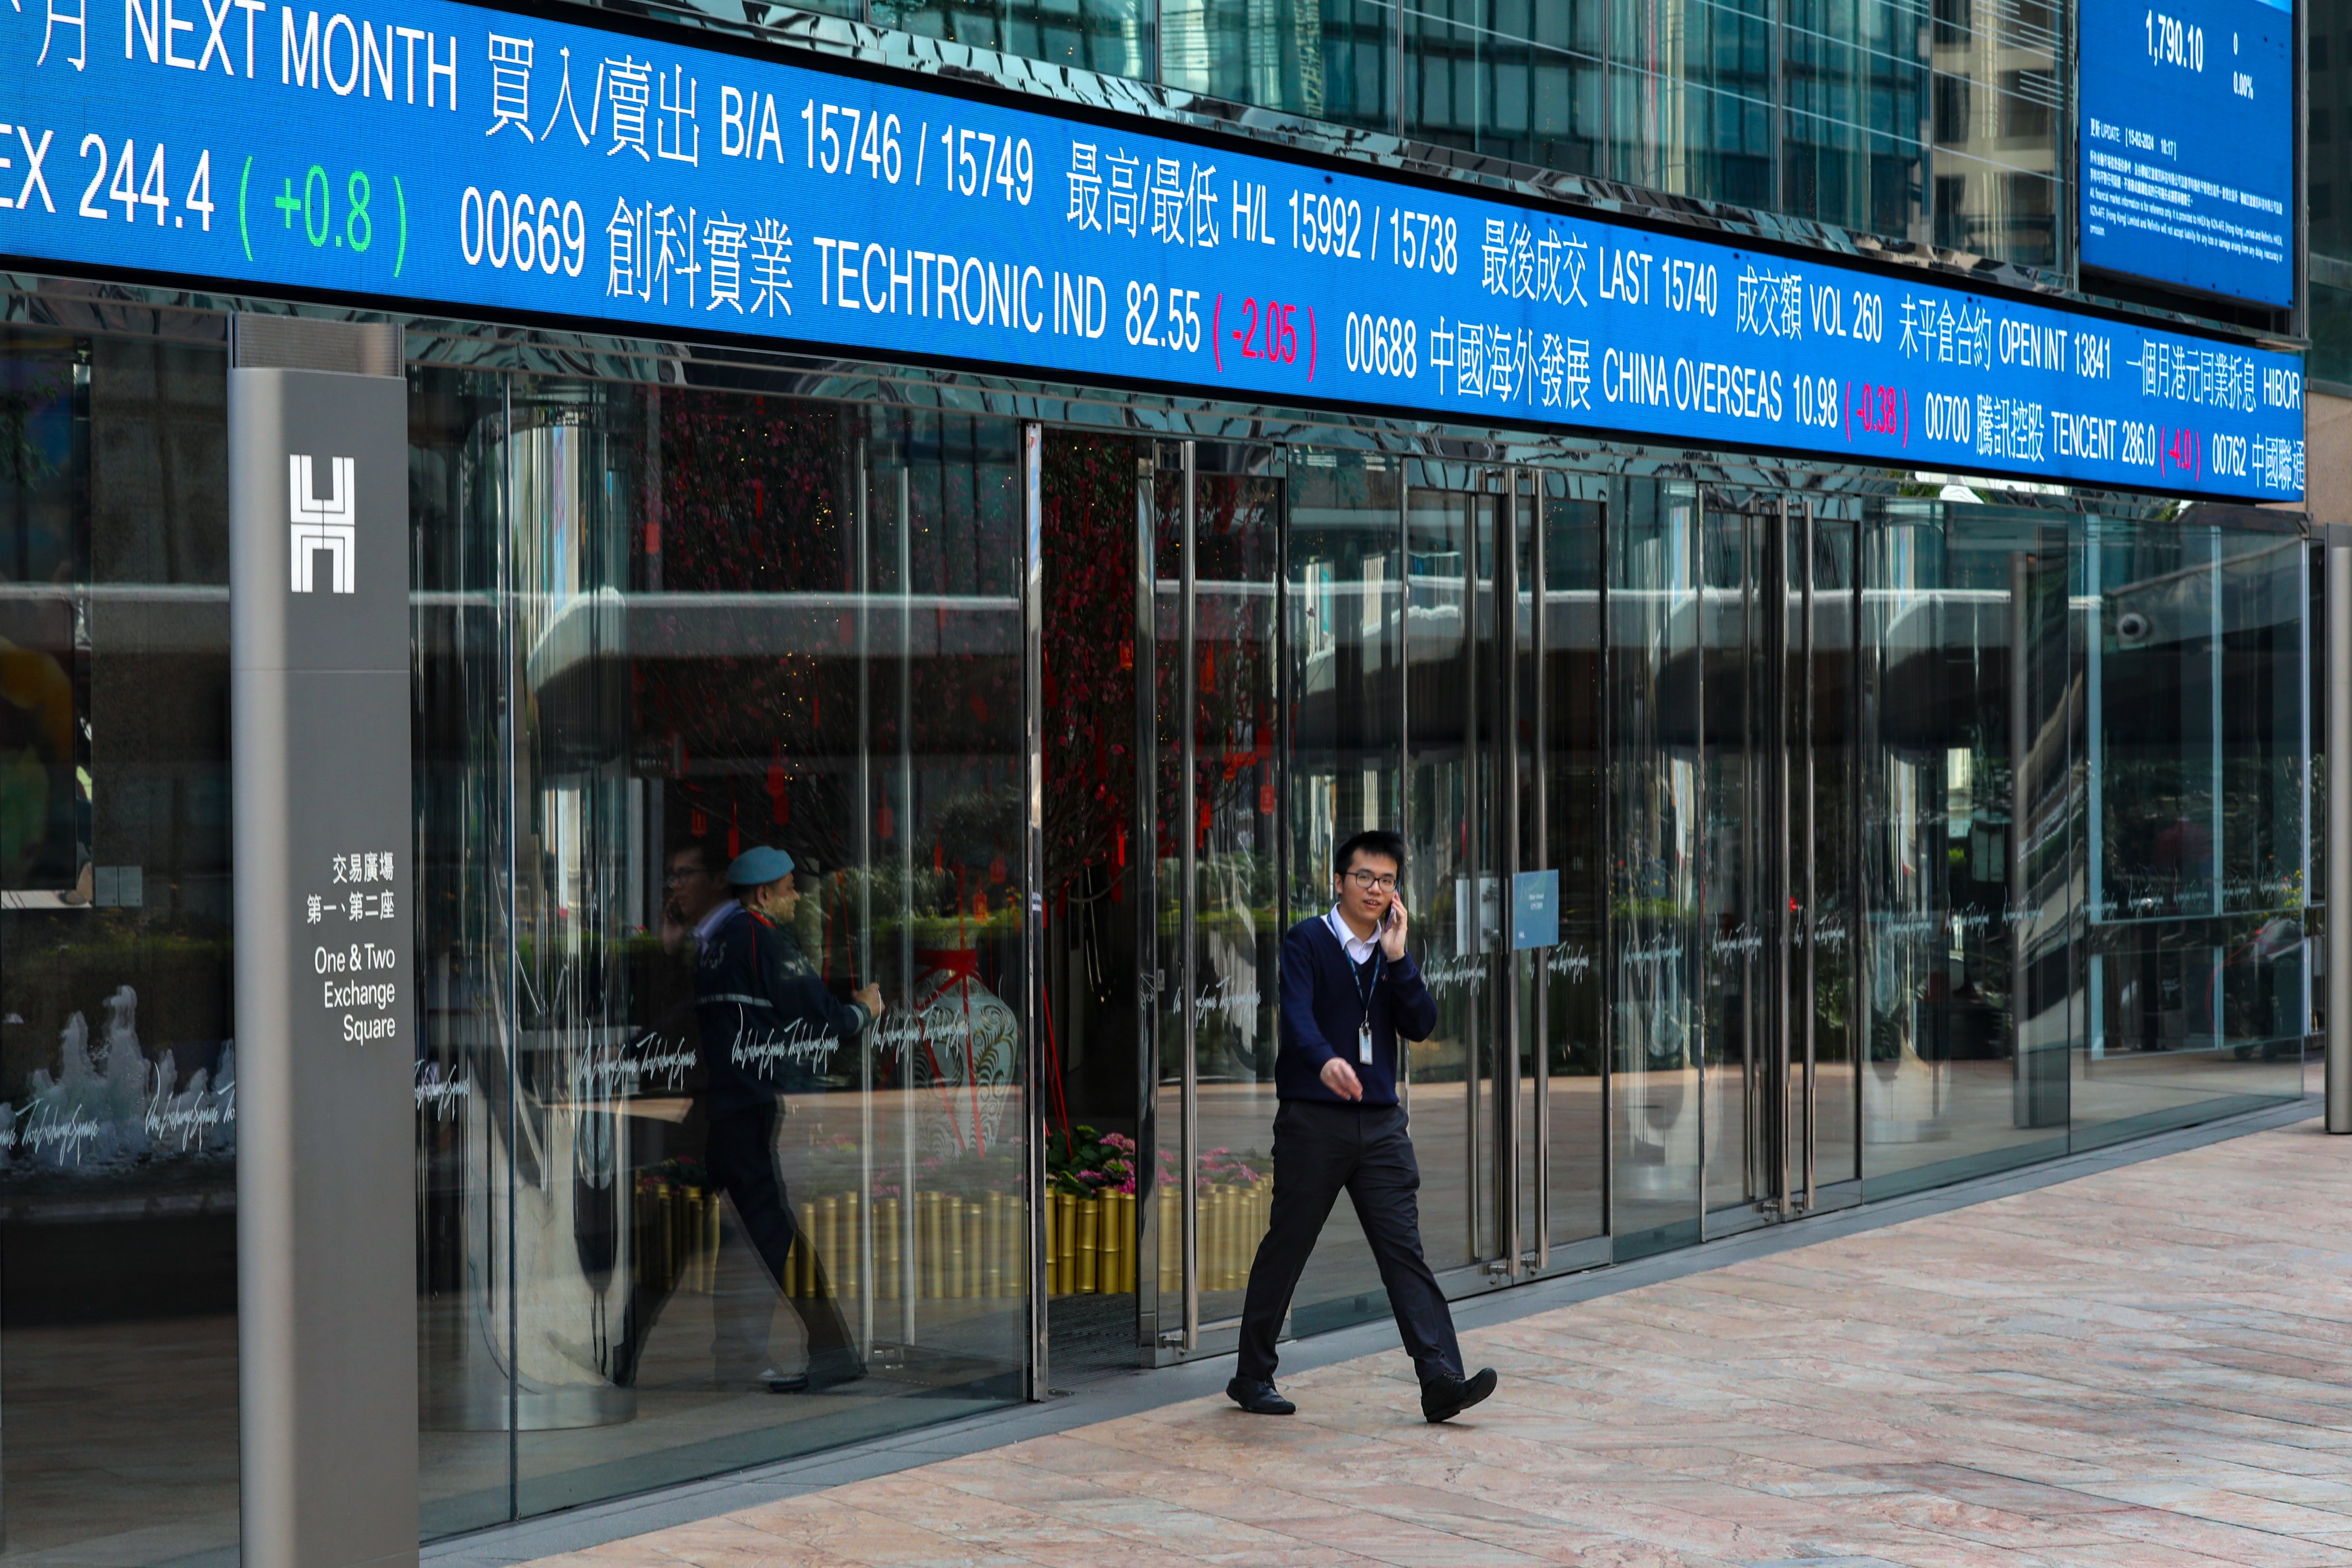 Cross-boundary investment products are appealing for residents of mainland China, but their limitations have deflated interest for many potential users. Photo: Sun Yeung